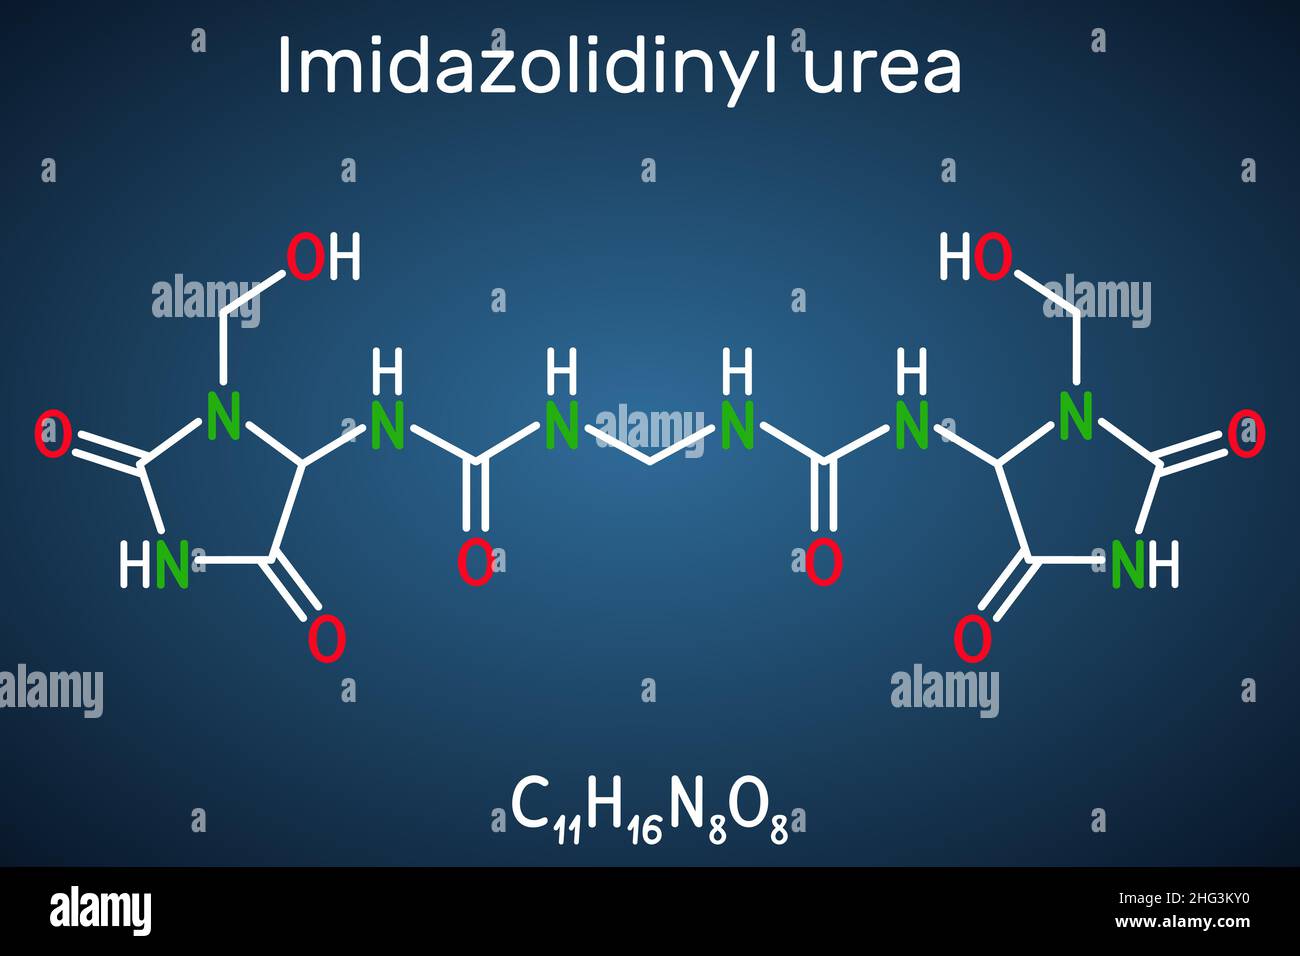 Imidazolidinyl urea, imidurea molecule. It is antimicrobial preservative used in cosmetics, formaldehyde releaser. Structural chemical formula on the Stock Vector